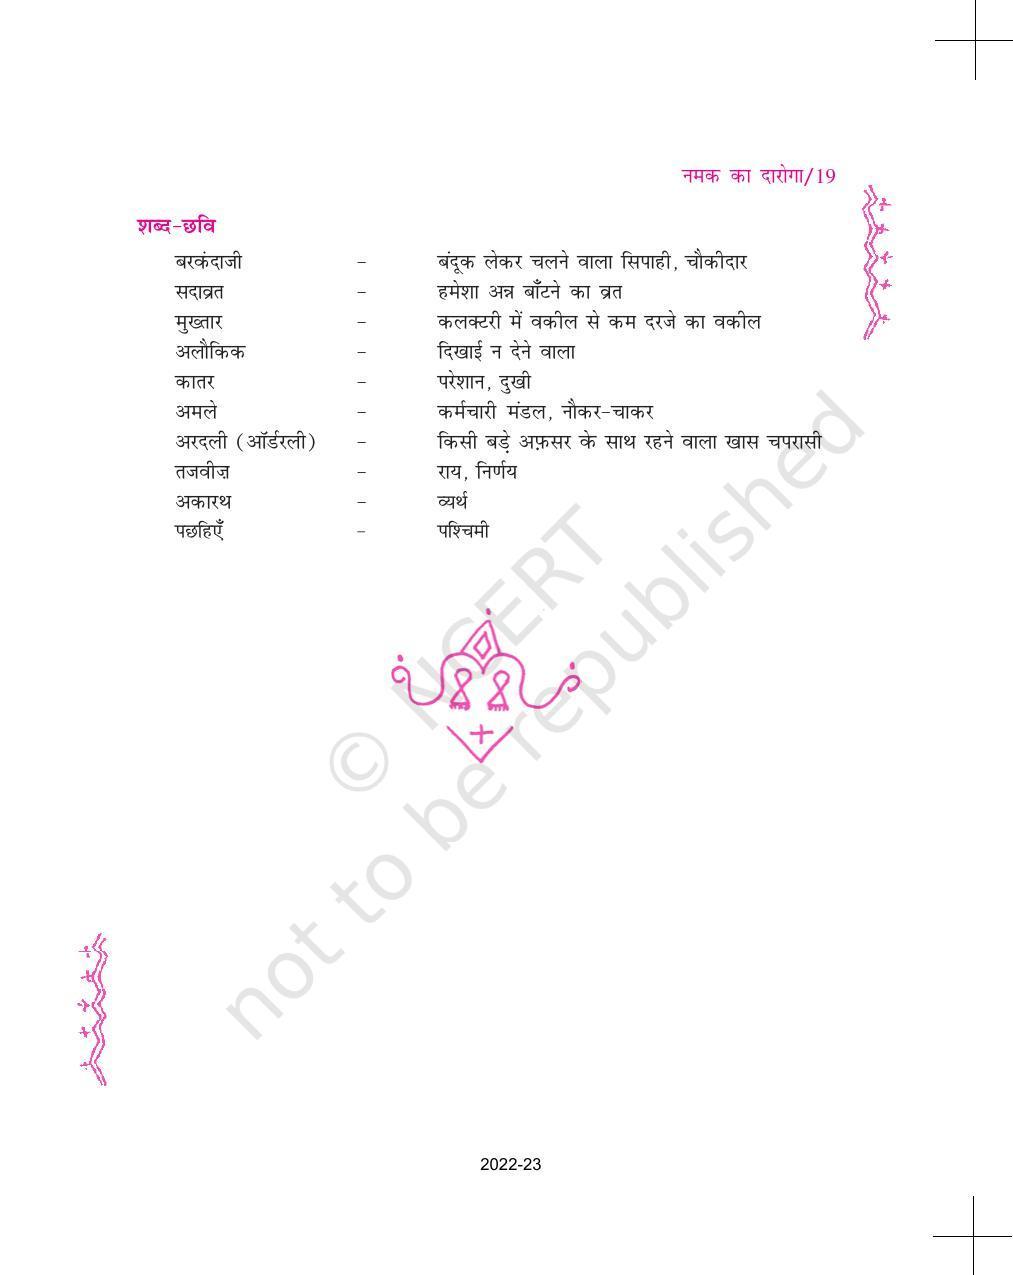 NCERT Book for Class 11 Hindi Aroh Chapter 1 नमक का दारोगा - Page 19